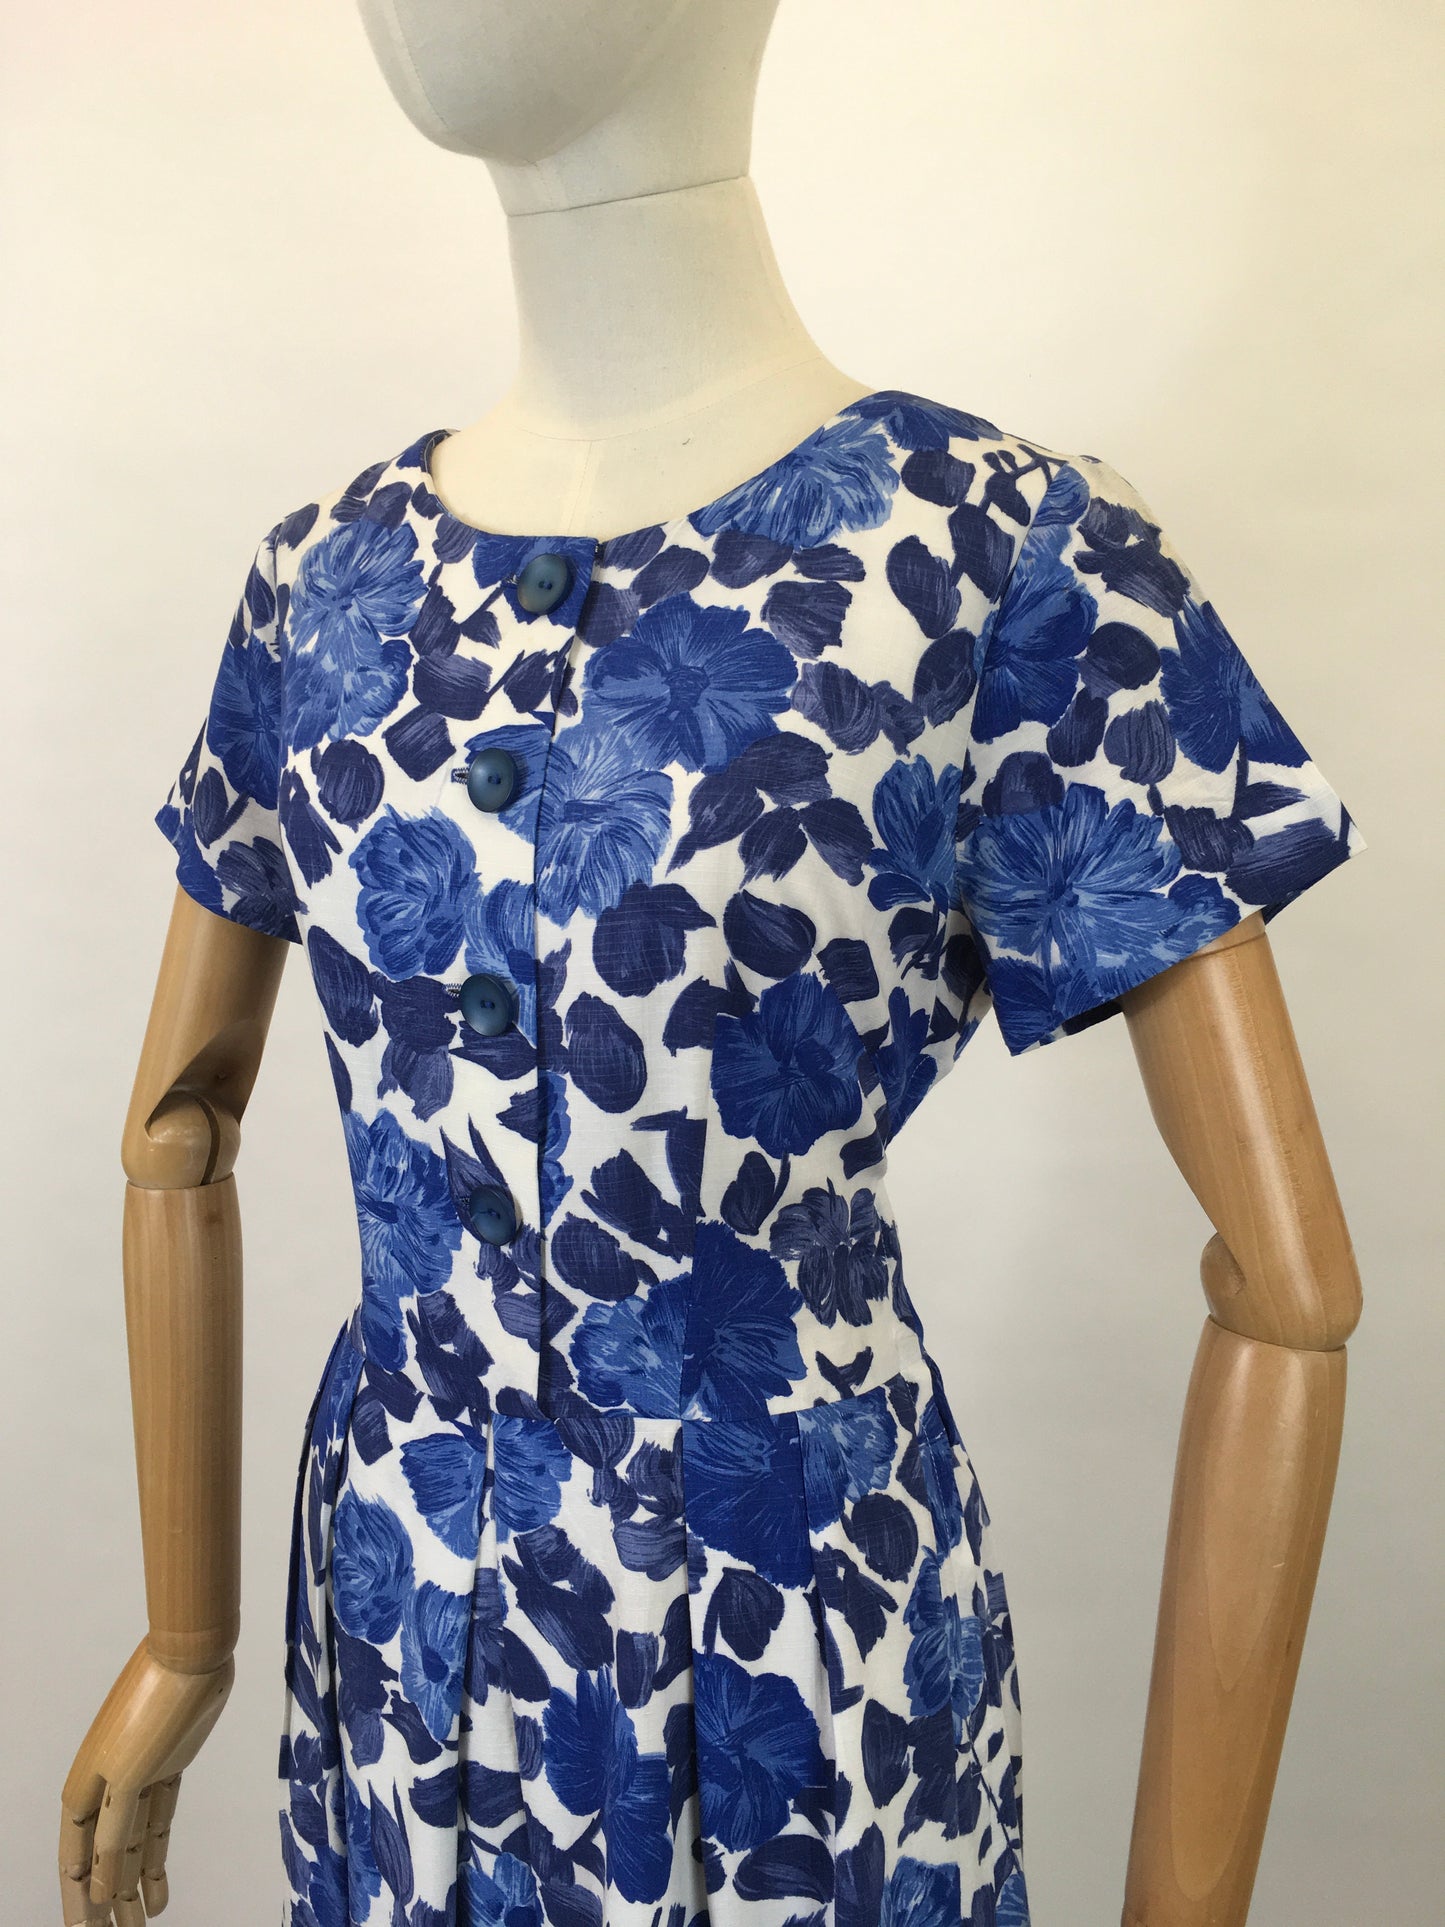 Original 1950’s Darling Floral Cotton Day Dress - Made by ‘ St. Michael ‘